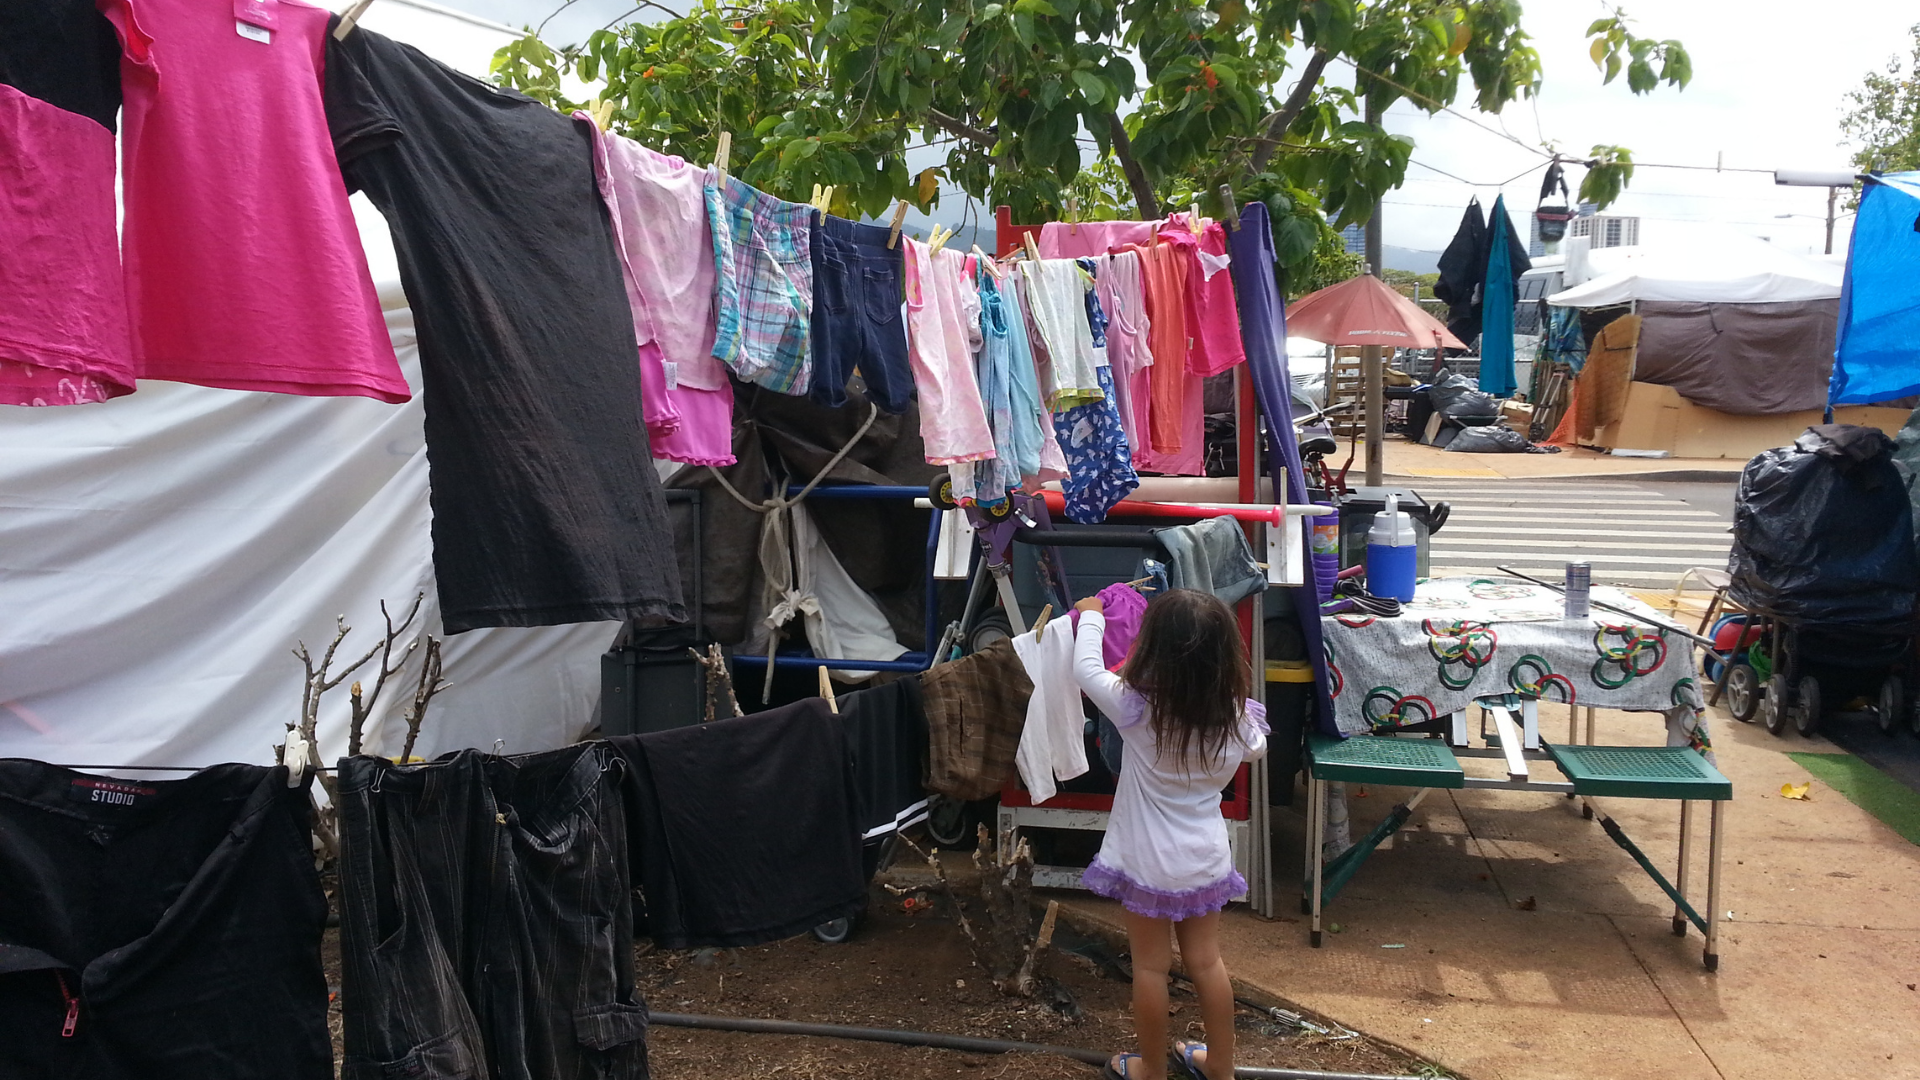 Three Years Old and Homeless in Hawaiʻi